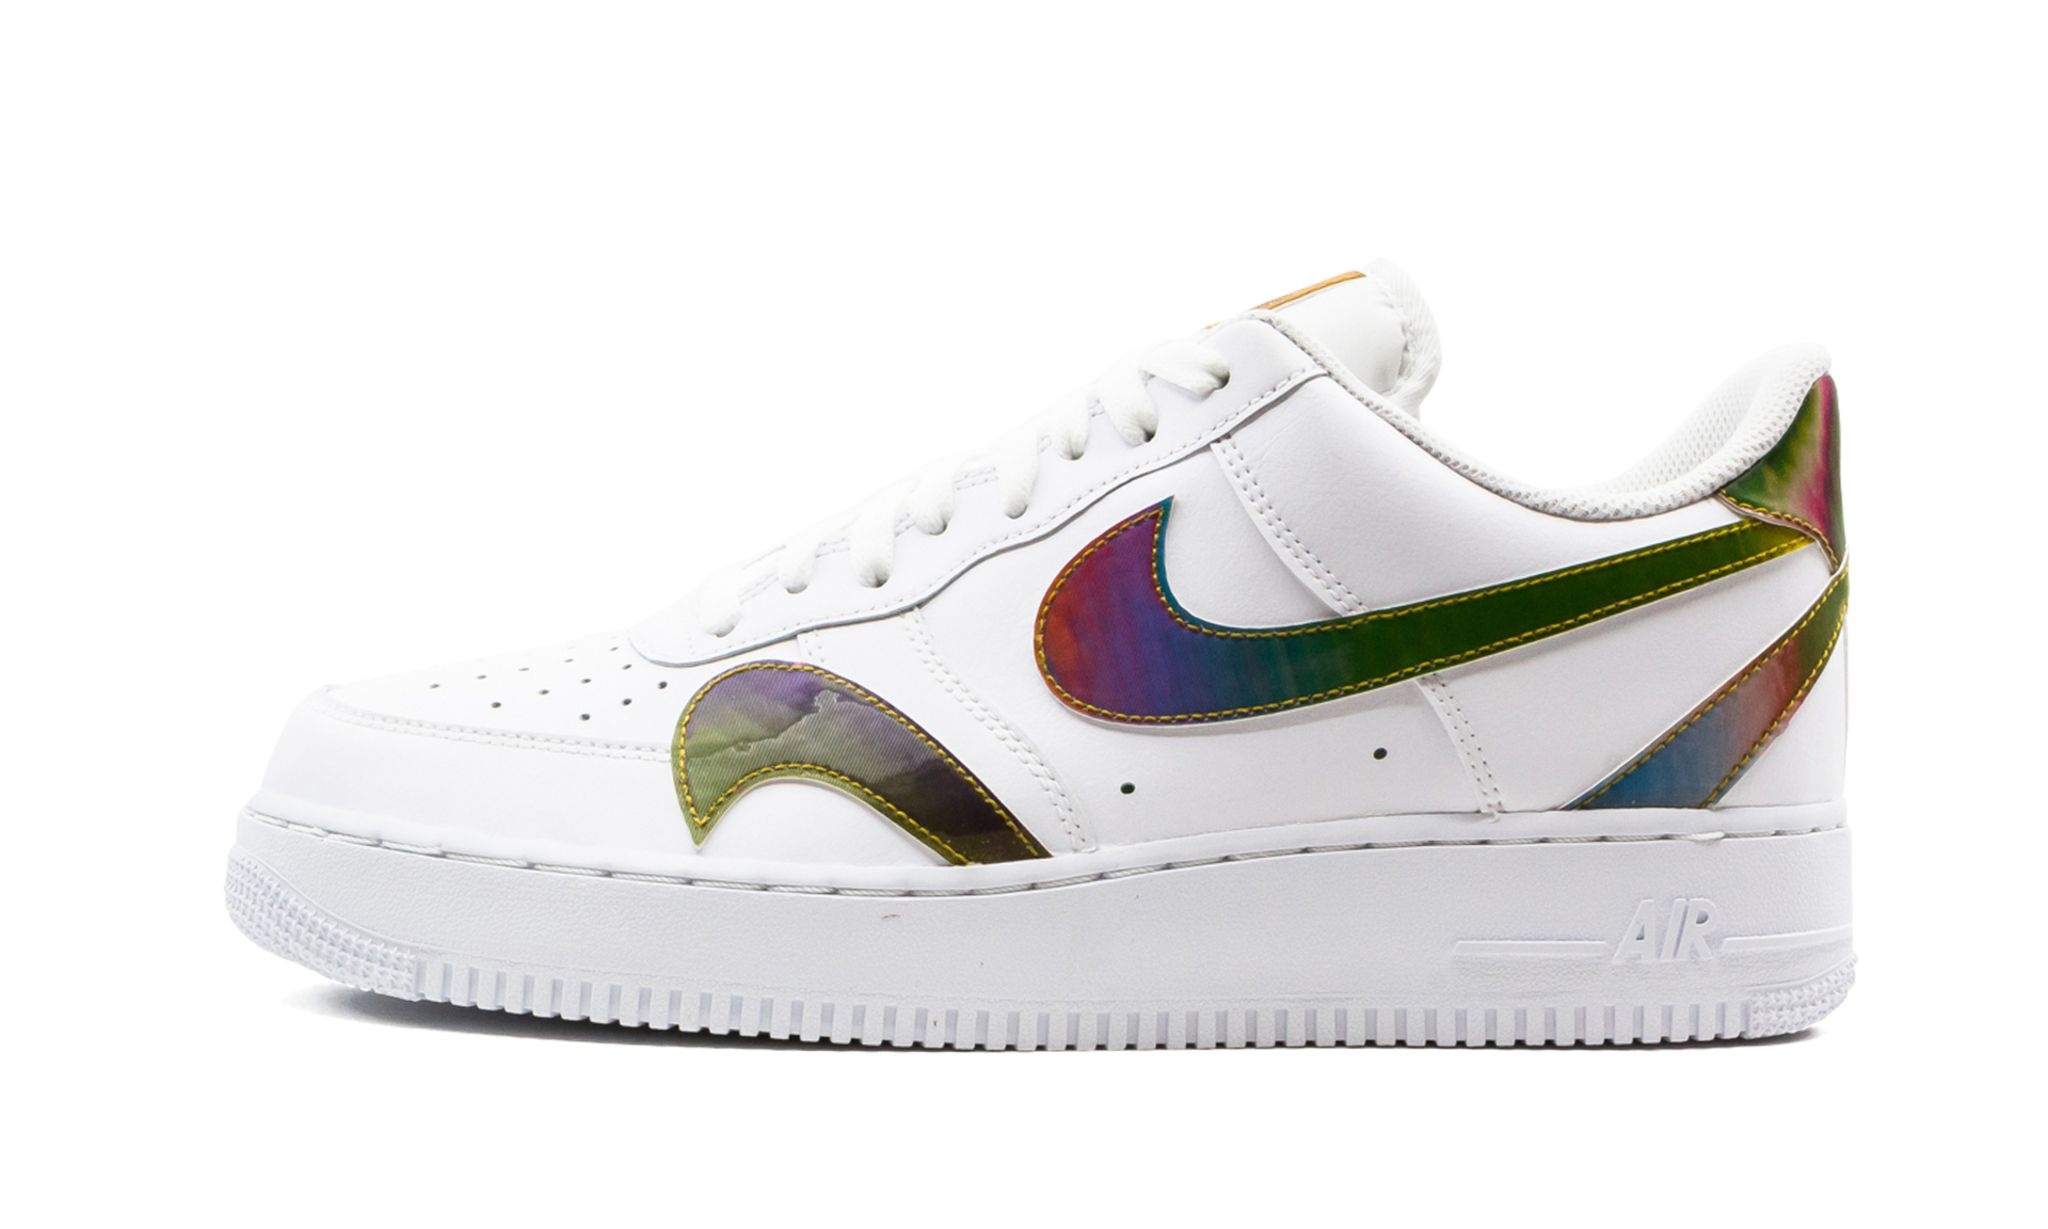 Air Force 1 '07 LV8 "Misplaced Swoosh" - 1